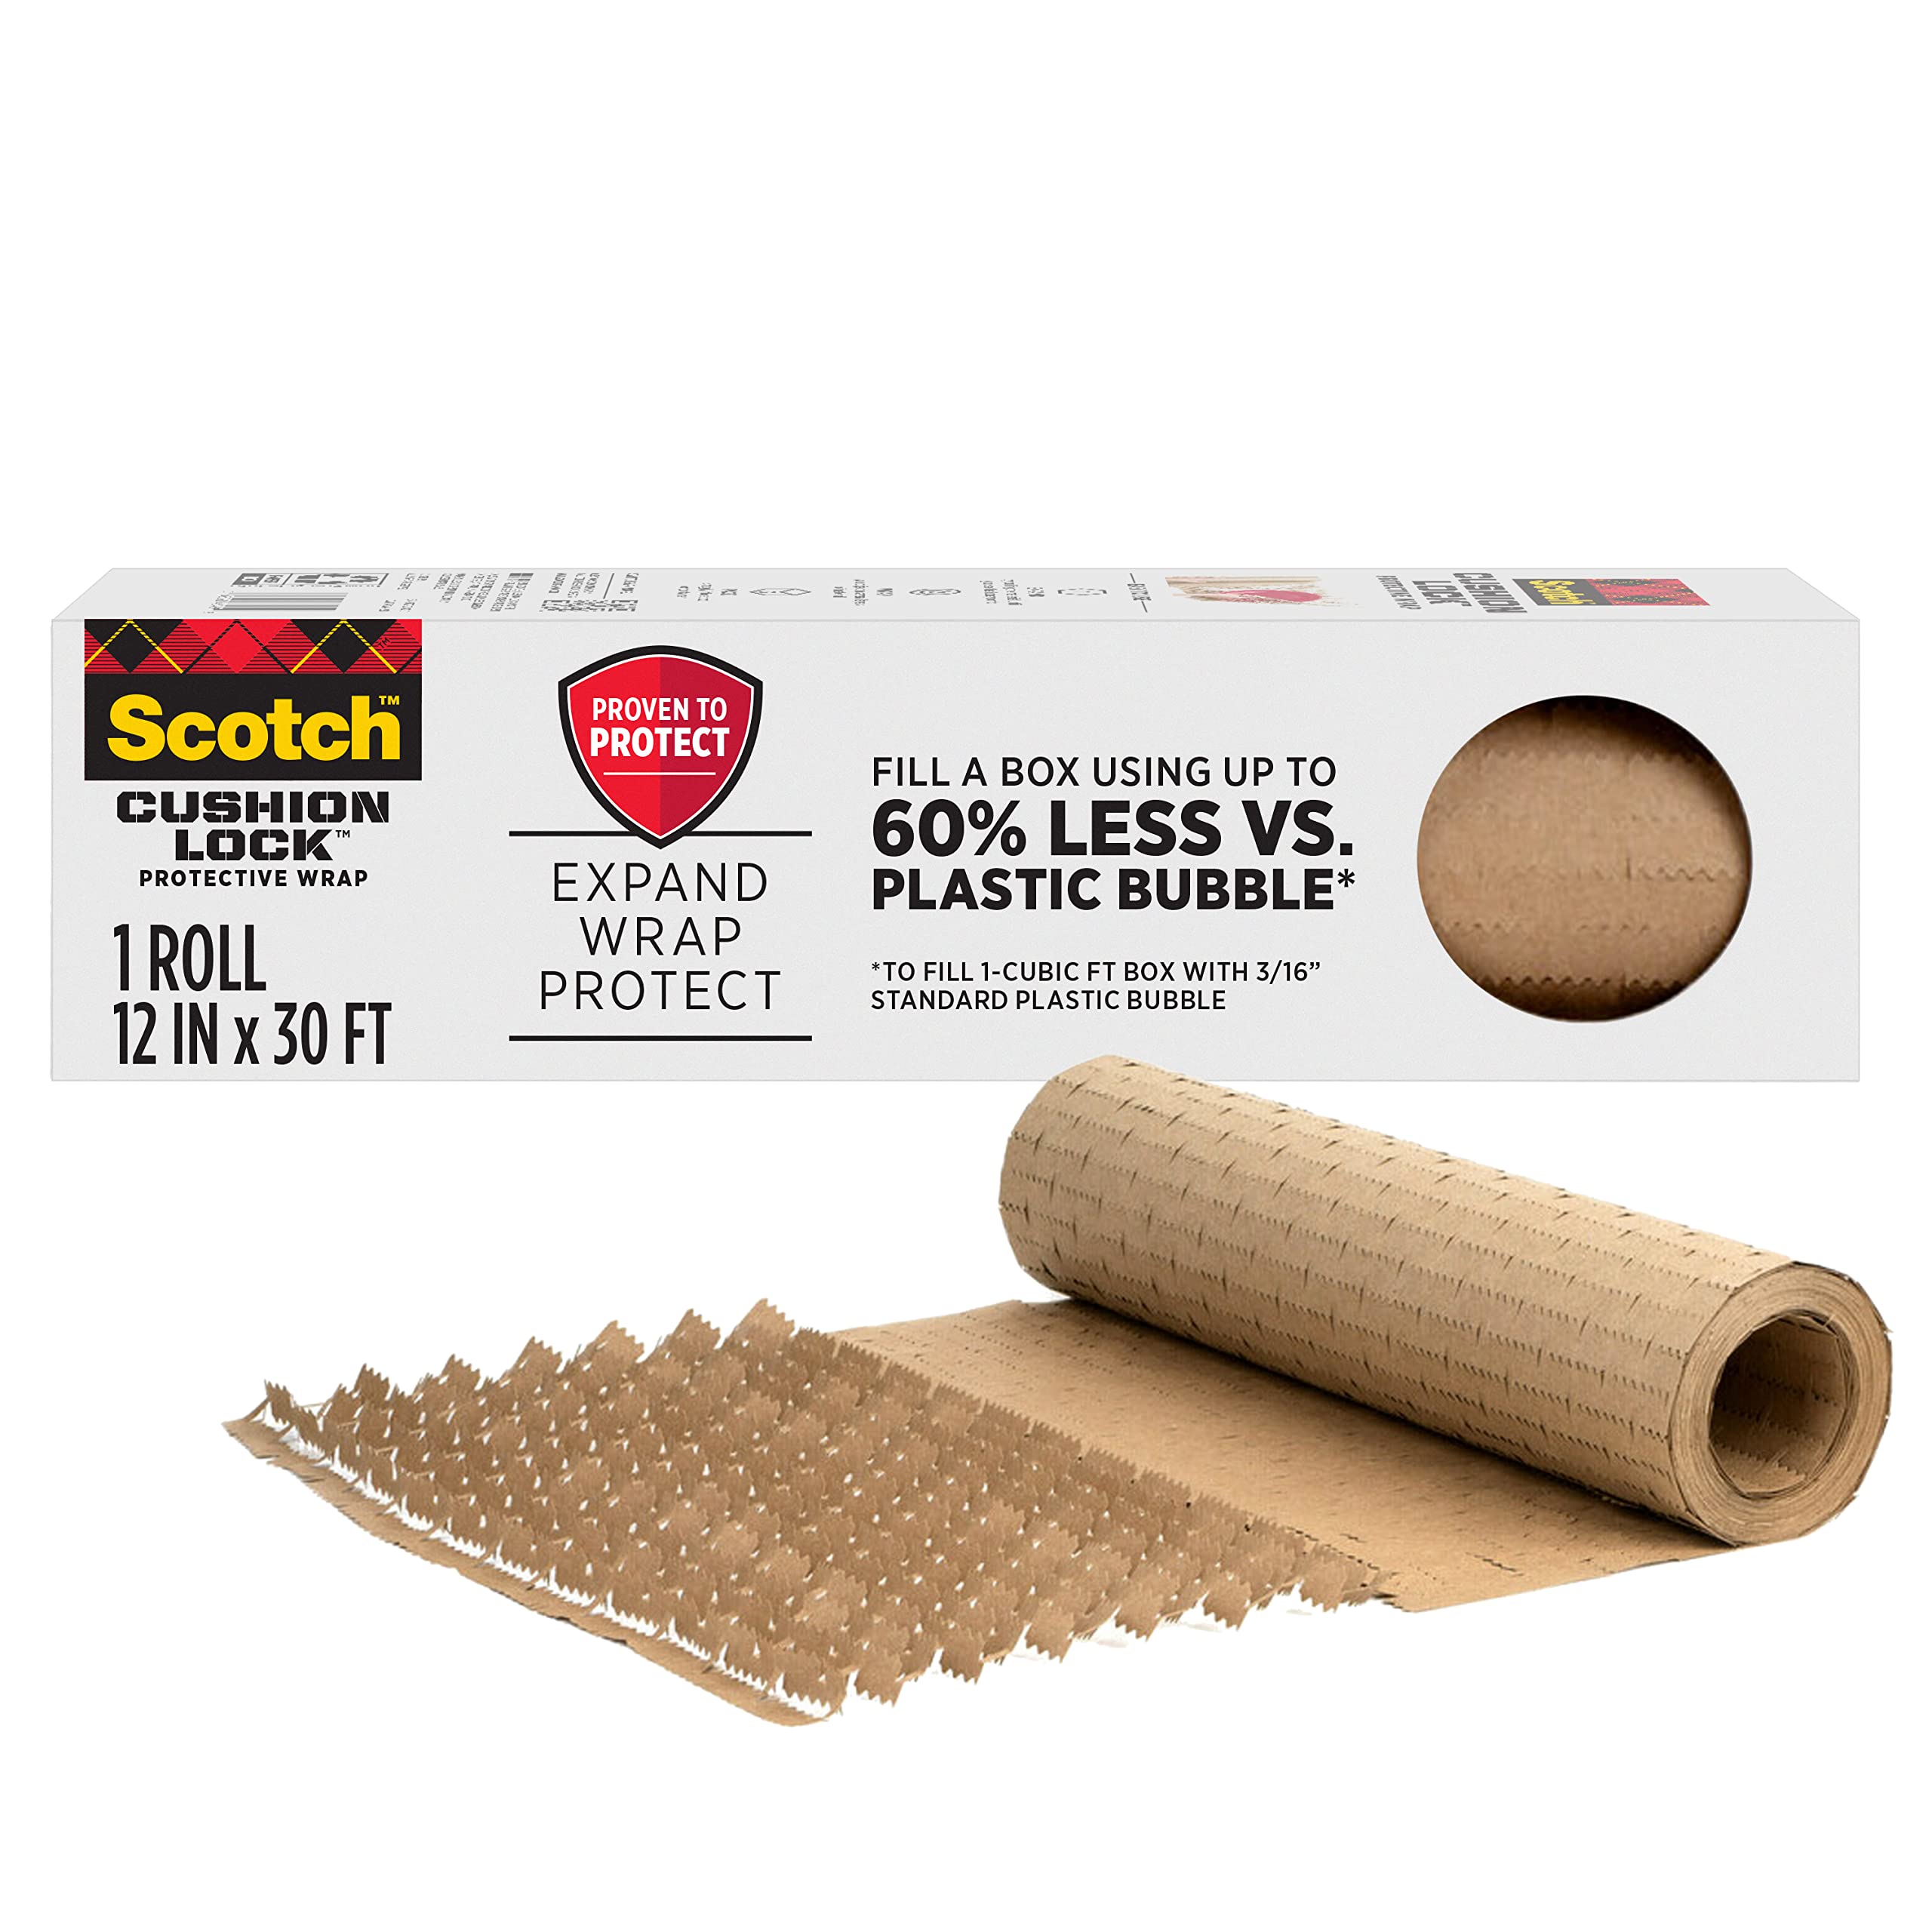 Scotch Cushion Lock Protective Wrap, 12 in x 30 ft, Sustainable Packaging Solution for Packing, Shipping and Moving, No Scissors or Tape Needed, Great Alternative to Bubble Cushion Wrap (PCW-1230)